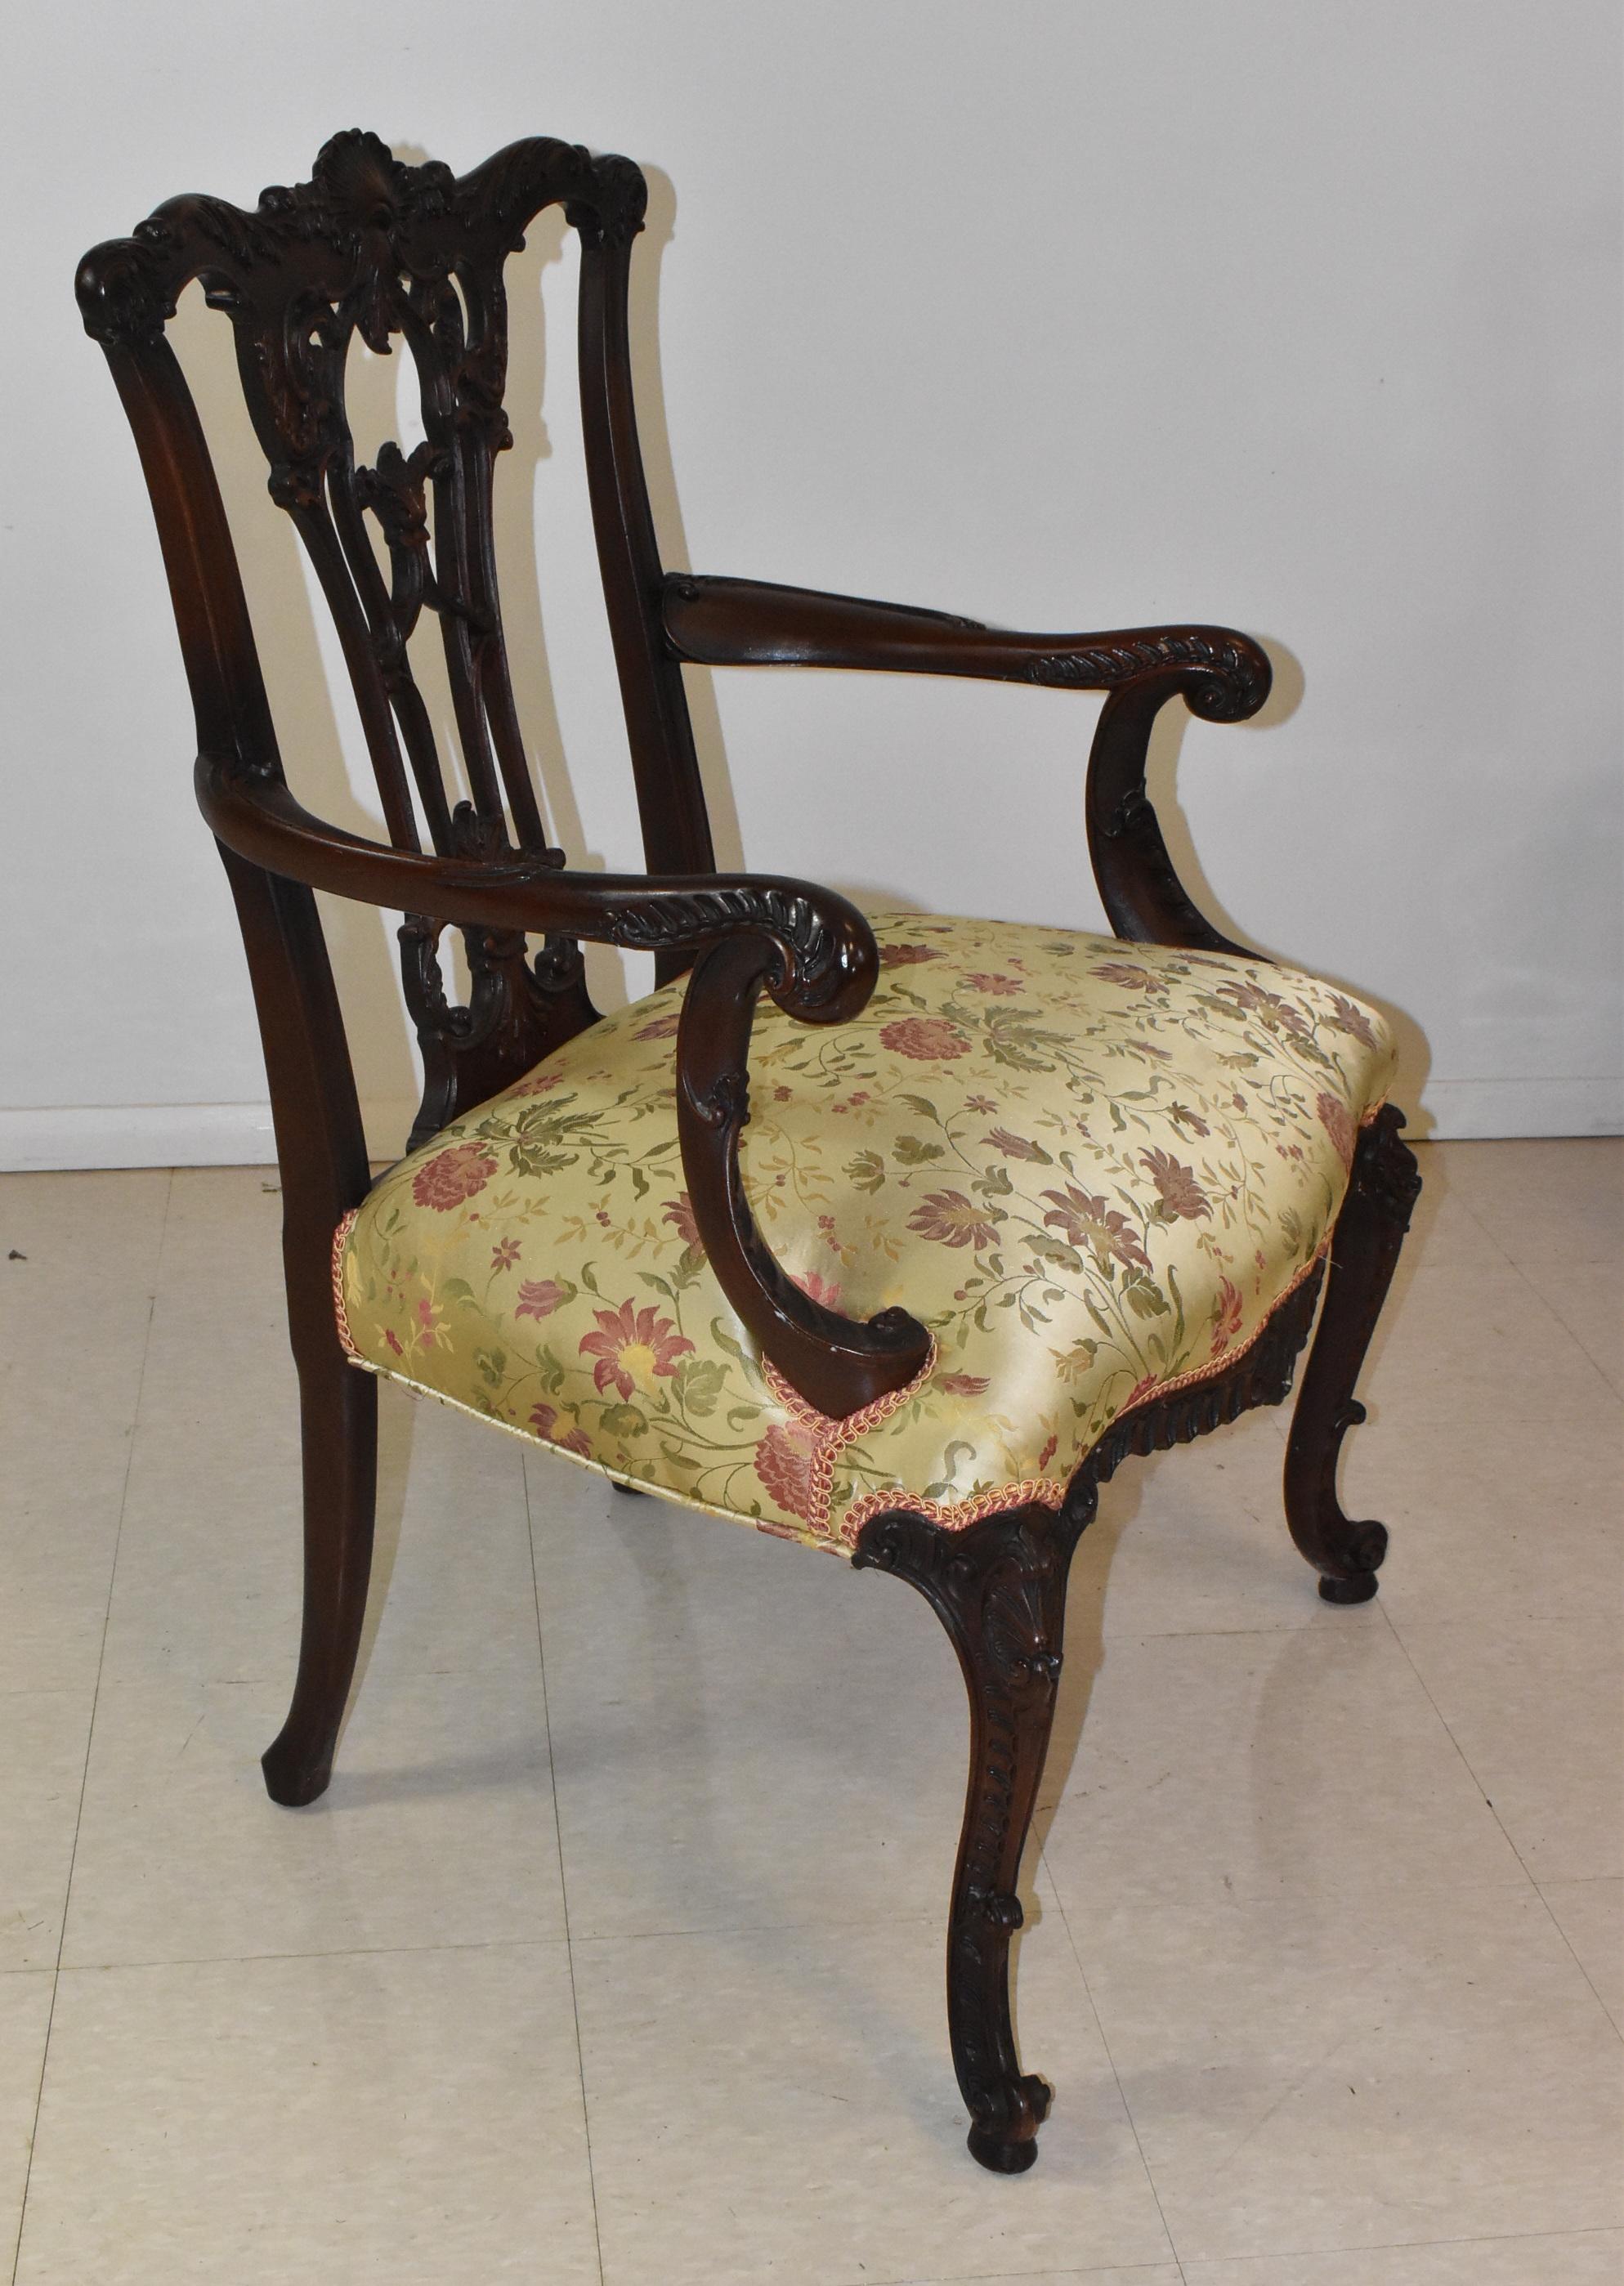 Pair of Chinese Chippendale armchairs carved mahogany frames, circa 1930s. Silk fabric. Old original finish.